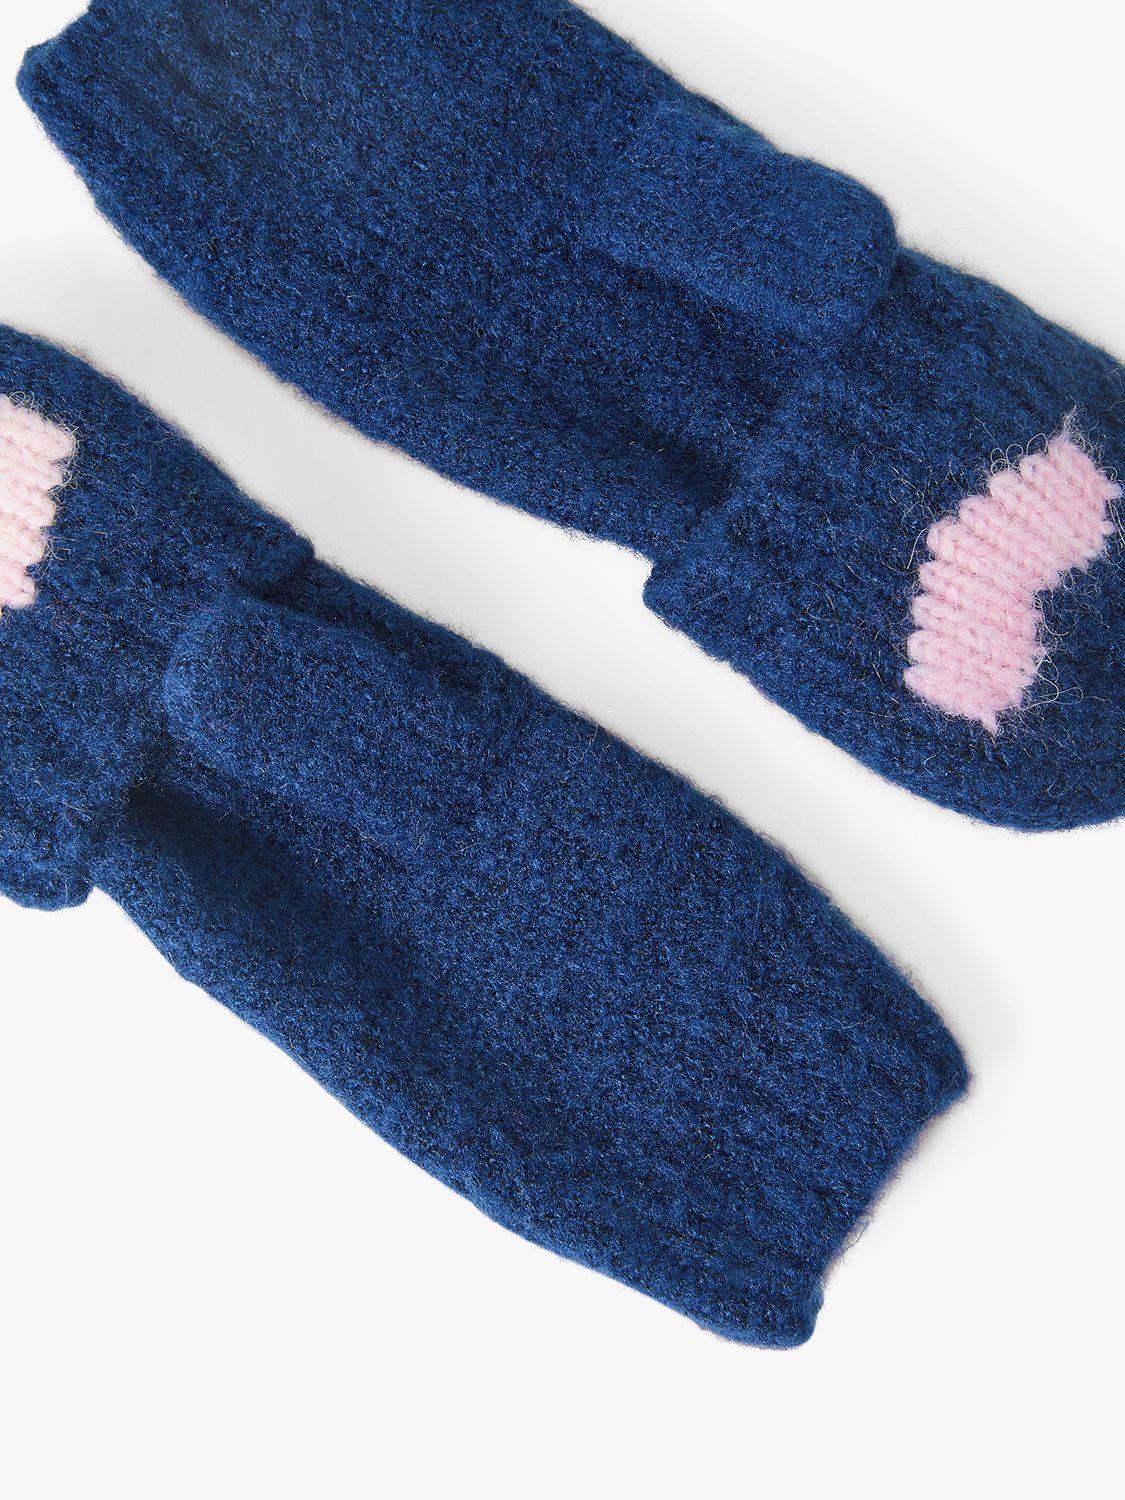 Buy Angels by Accessorize Kids' Heart Capped Gloves, Navy/Multi Online at johnlewis.com